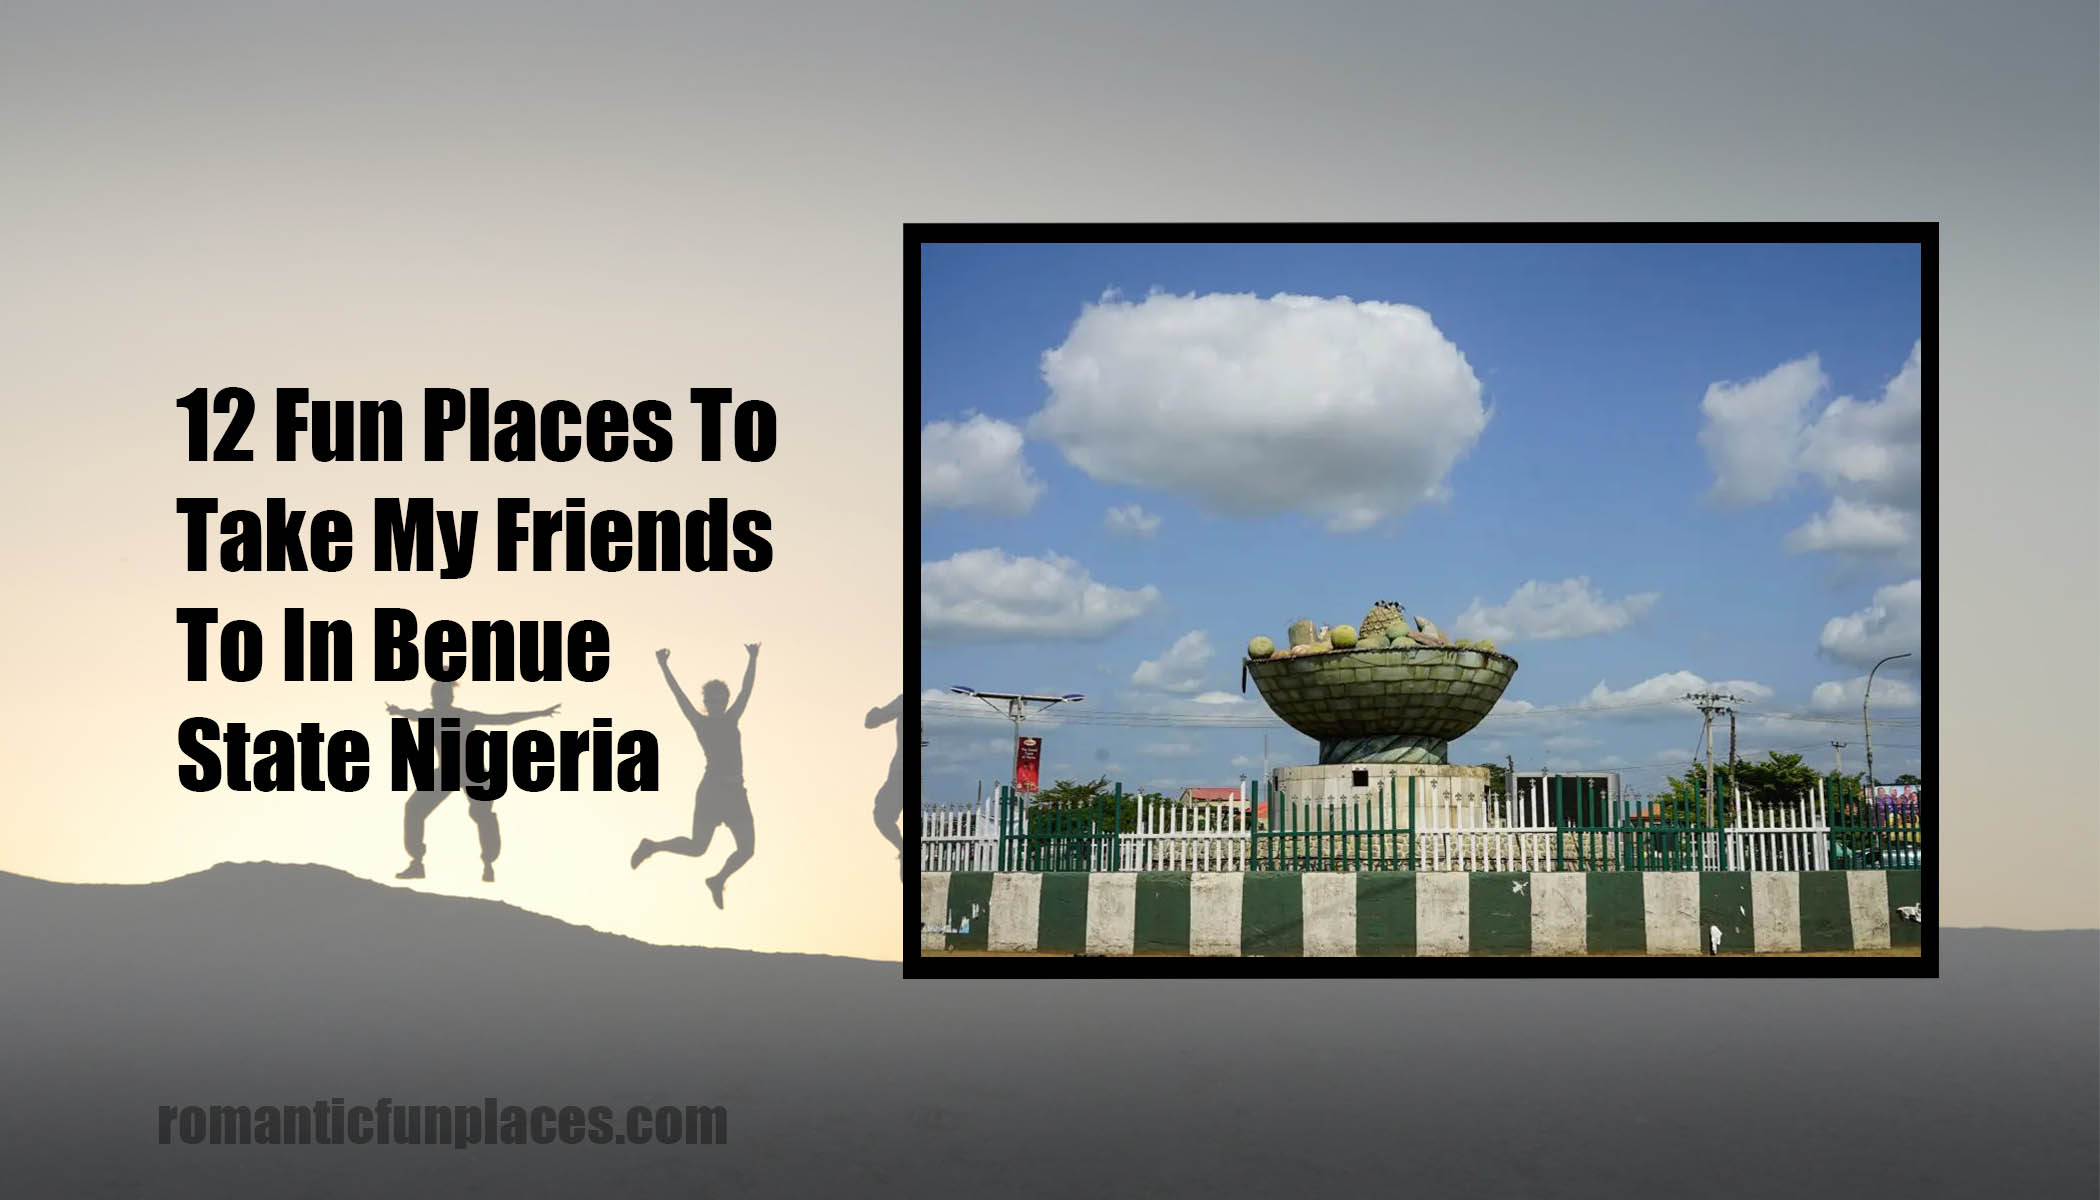 12 Fun Places To Take My Friends To In Benue State Nigeria